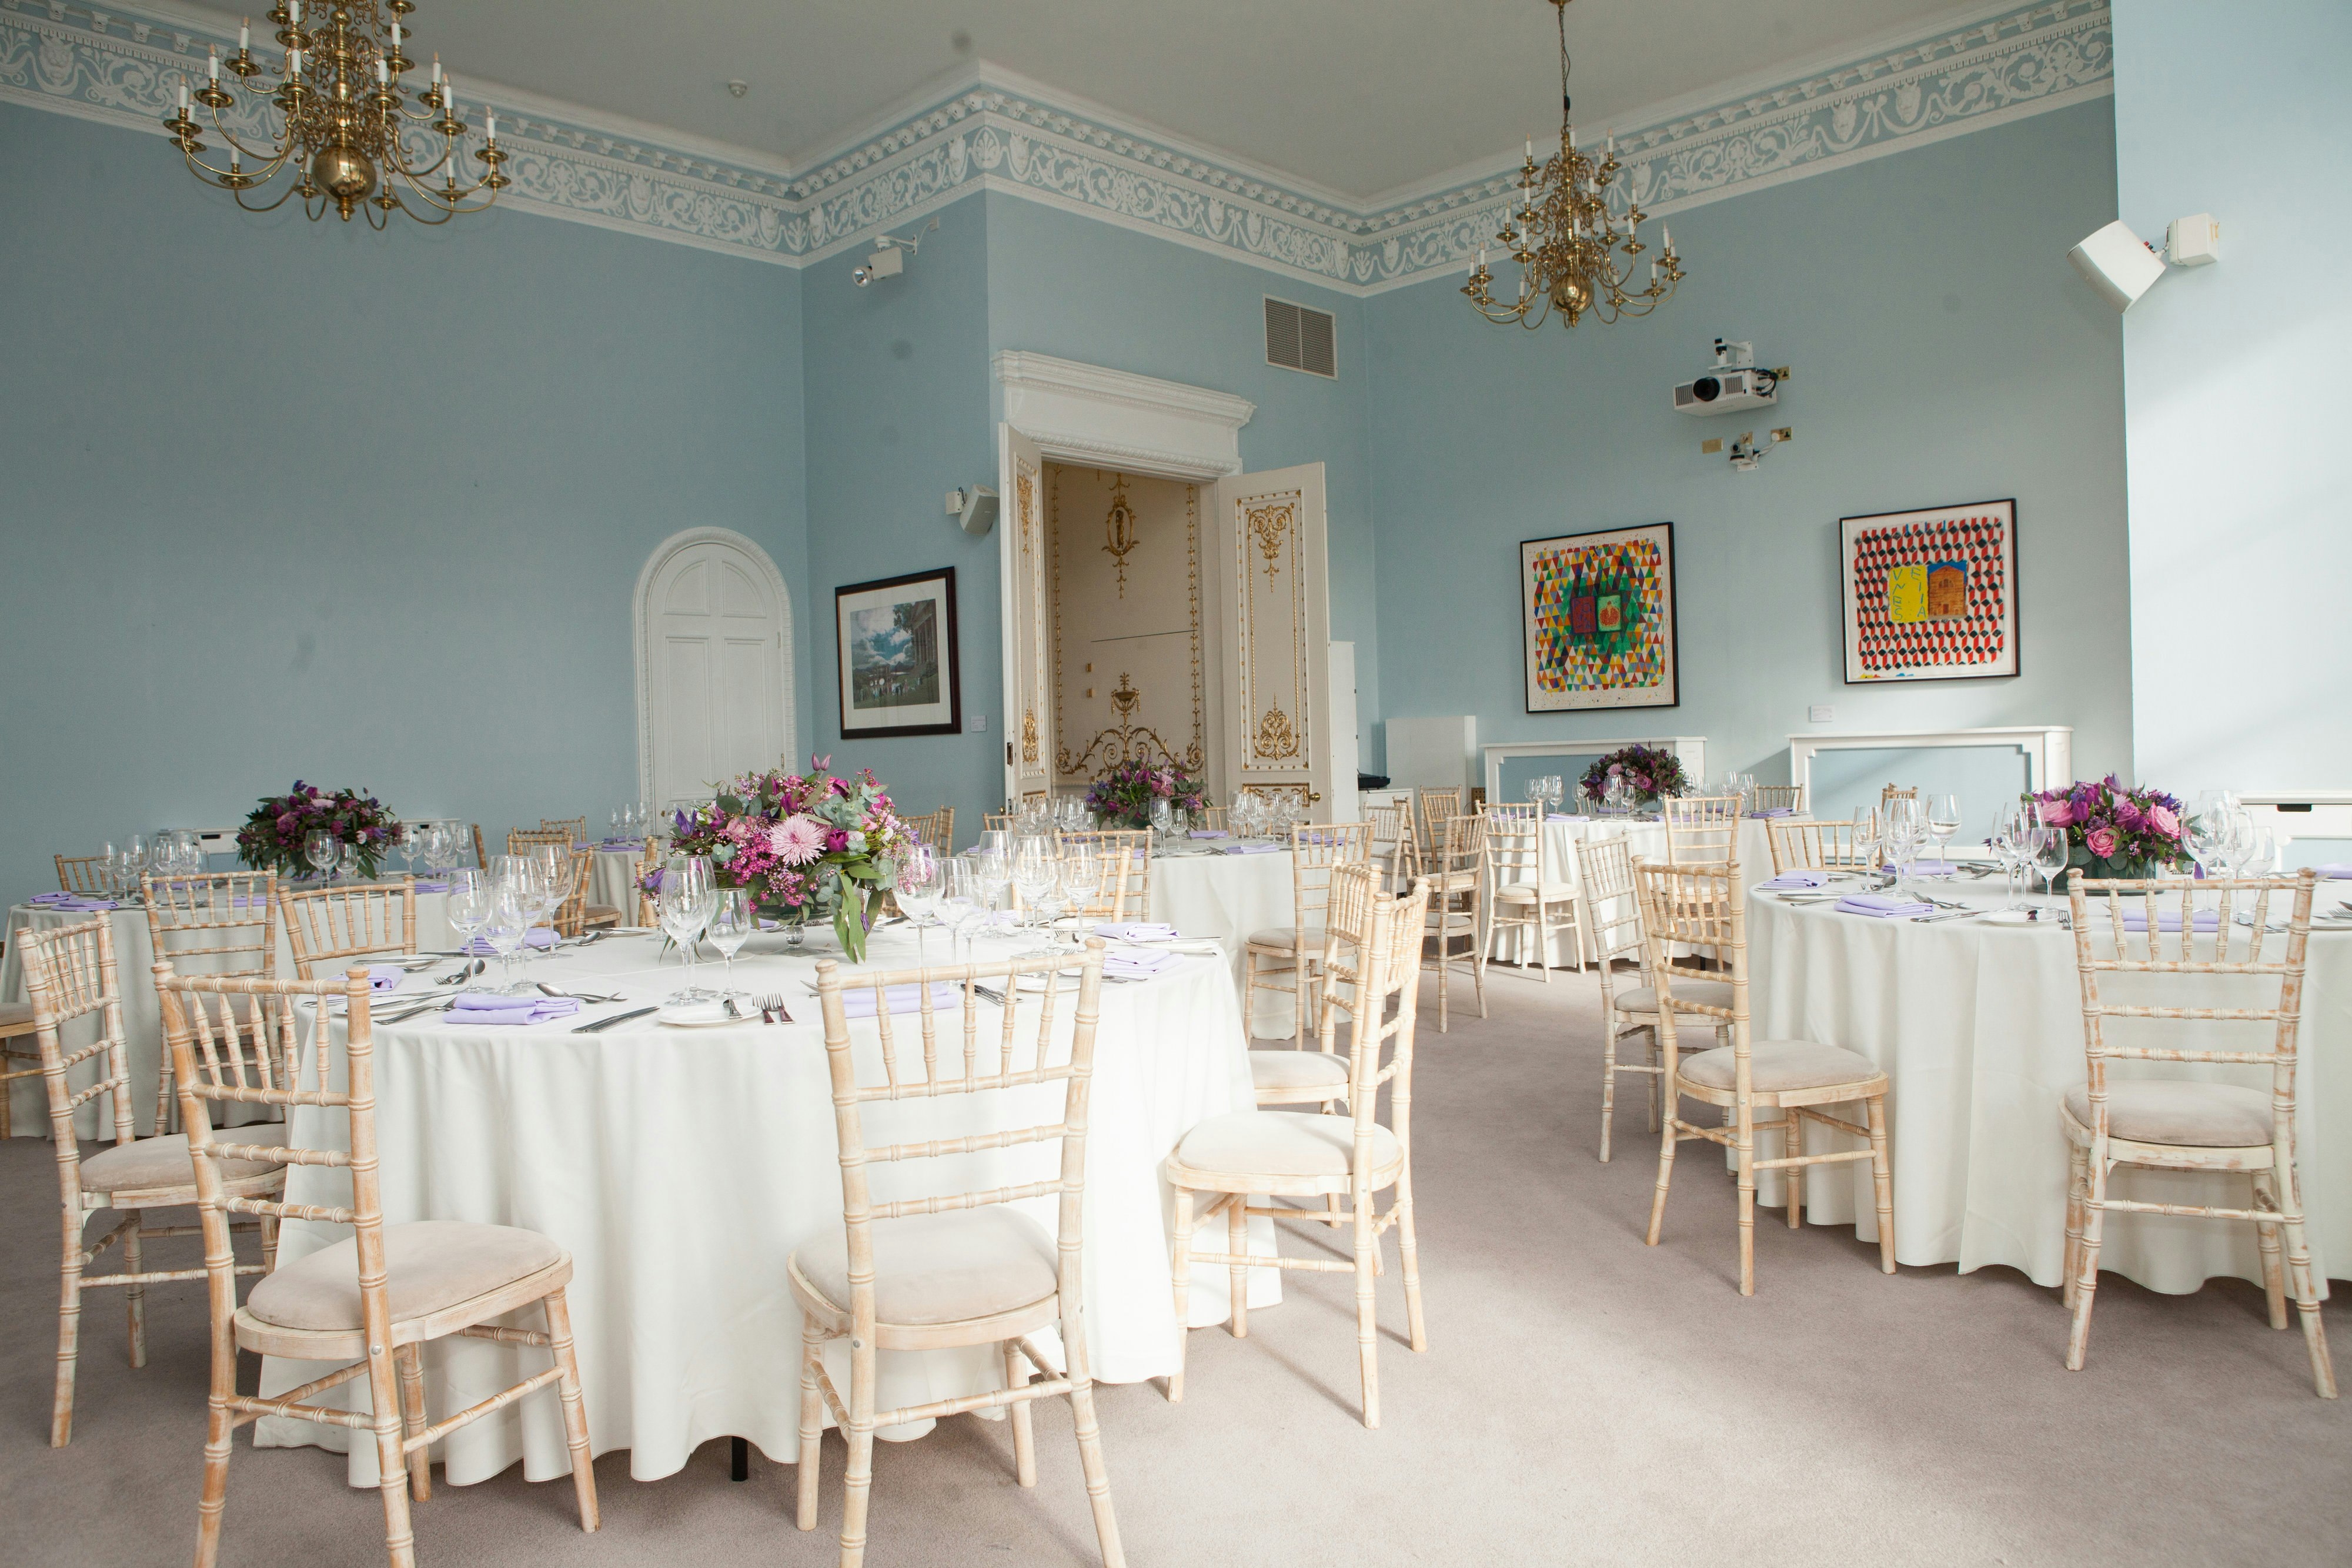 {10-11} Carlton House Terrace - Wolfson Room & Gallery image 2